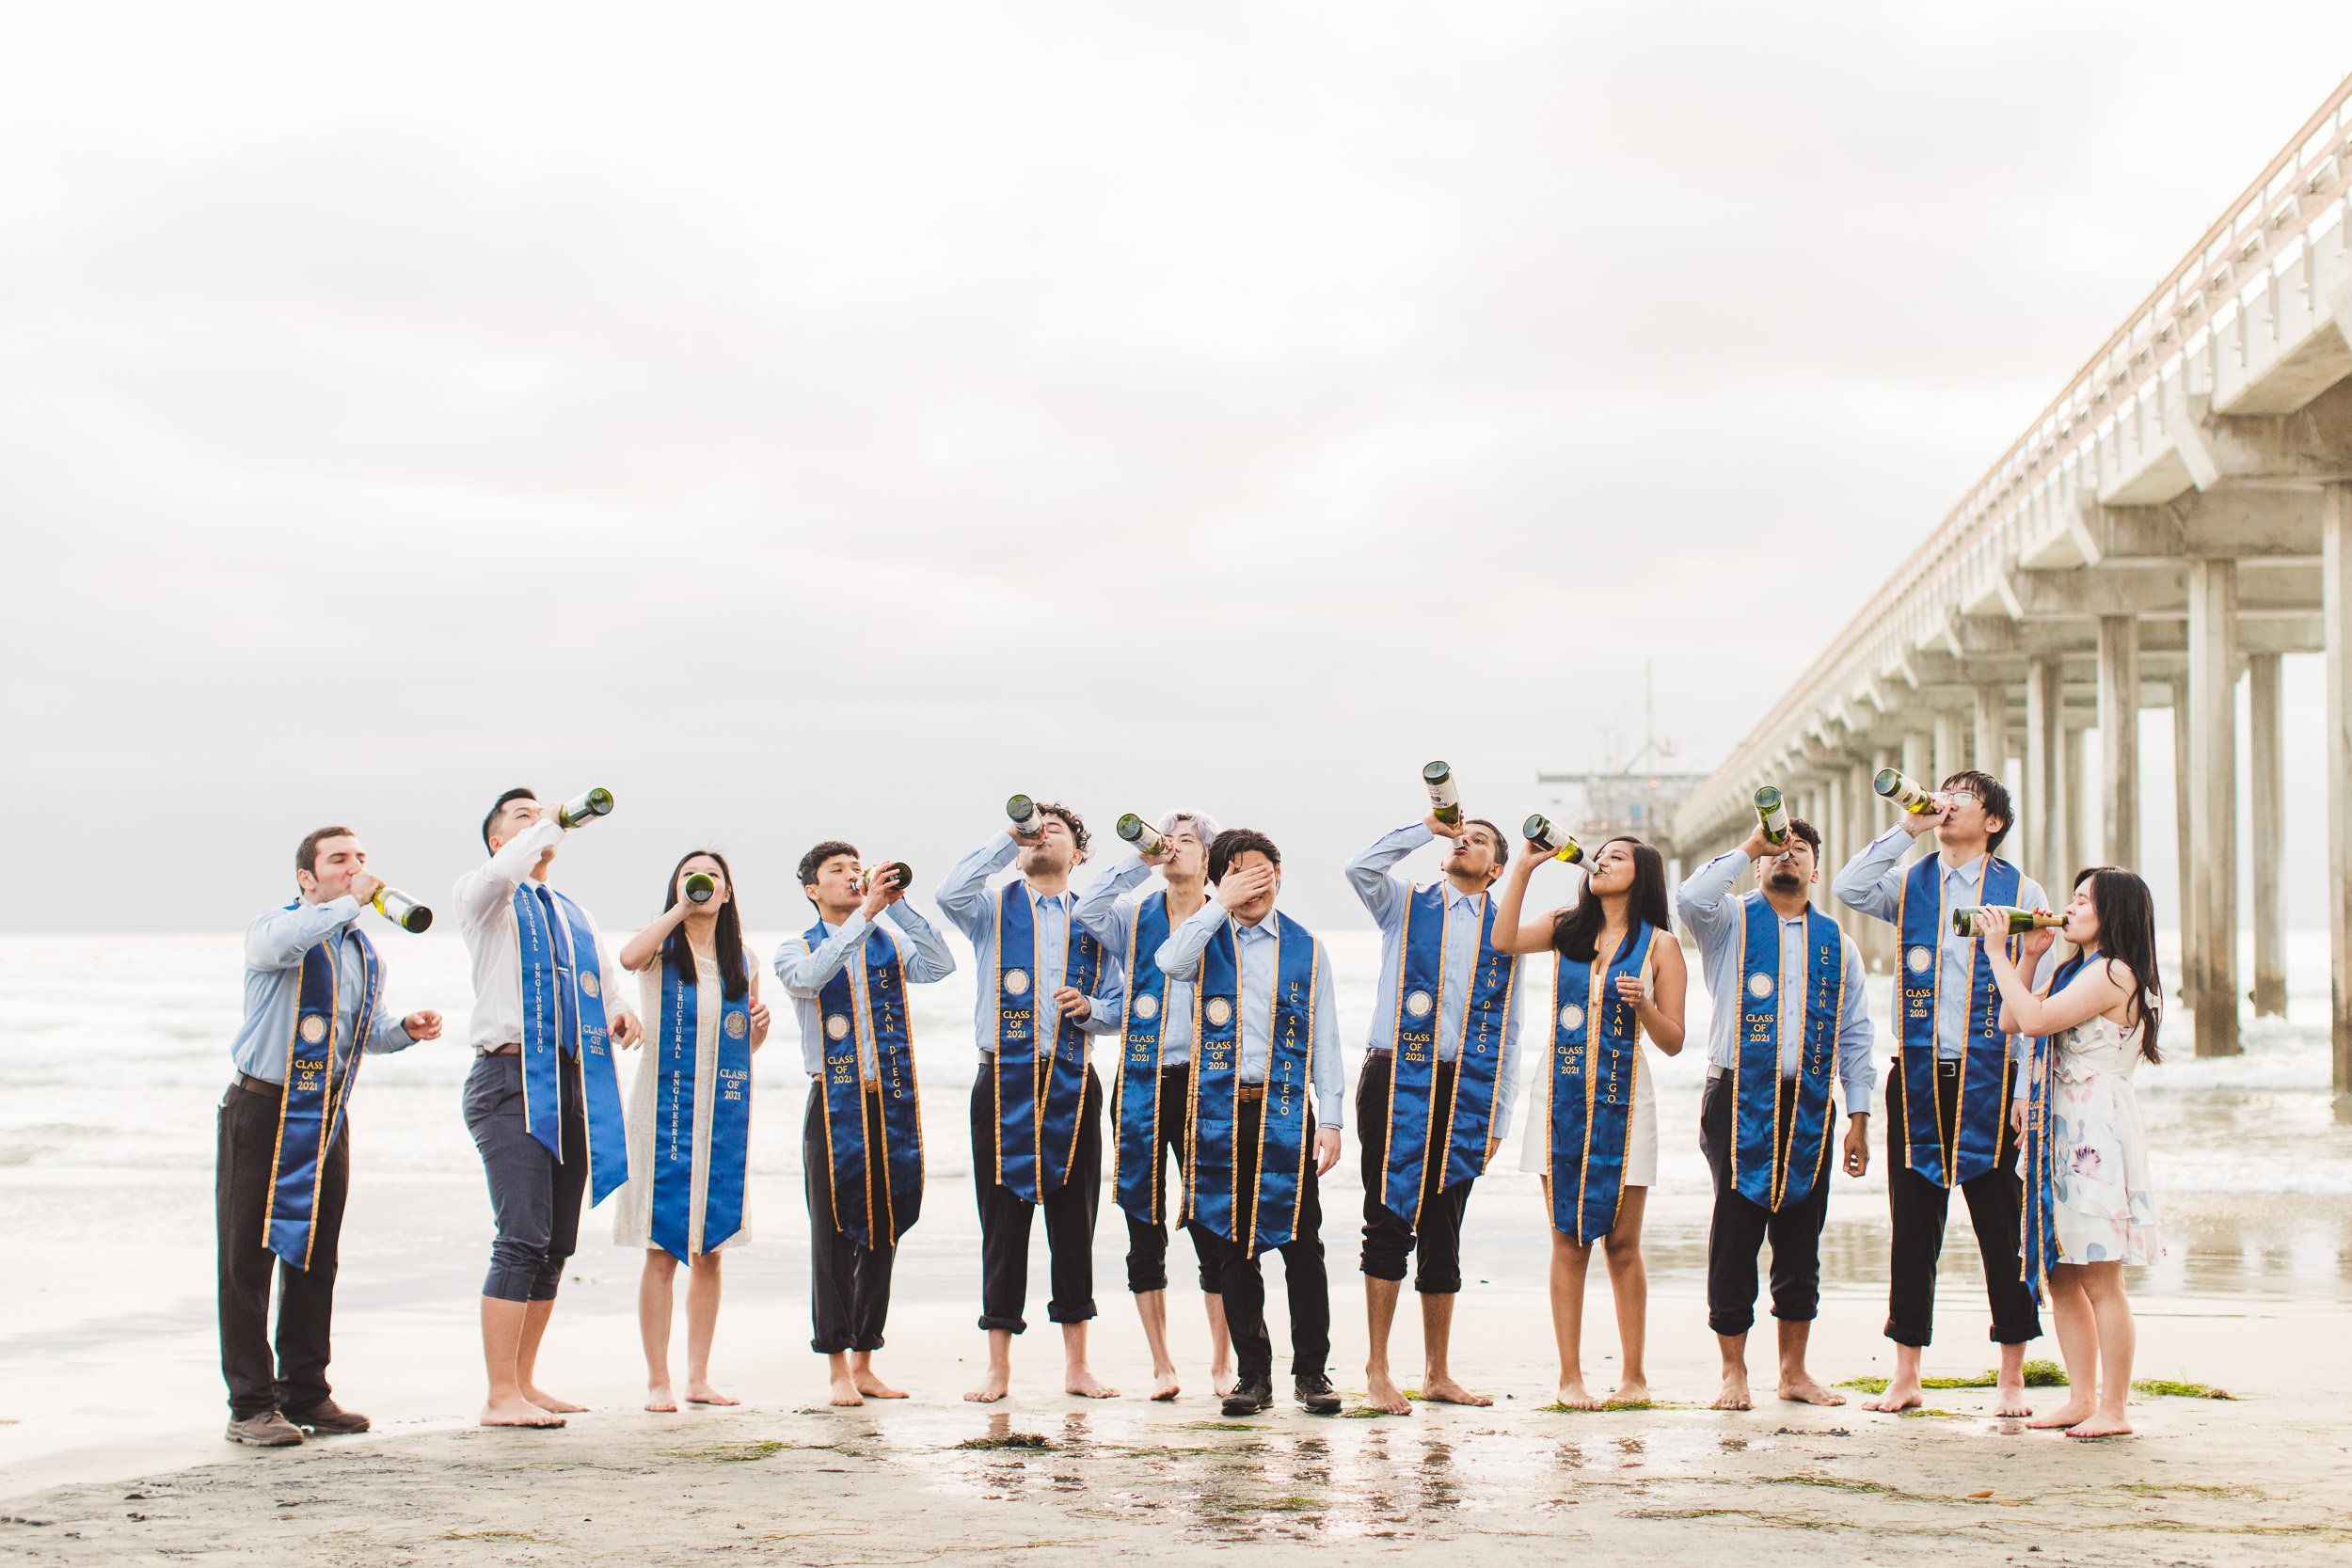 Graduation Portraits for large groups at the beach, action shot of popping champagne bottles and funny moment captured. Los Angeles, CA